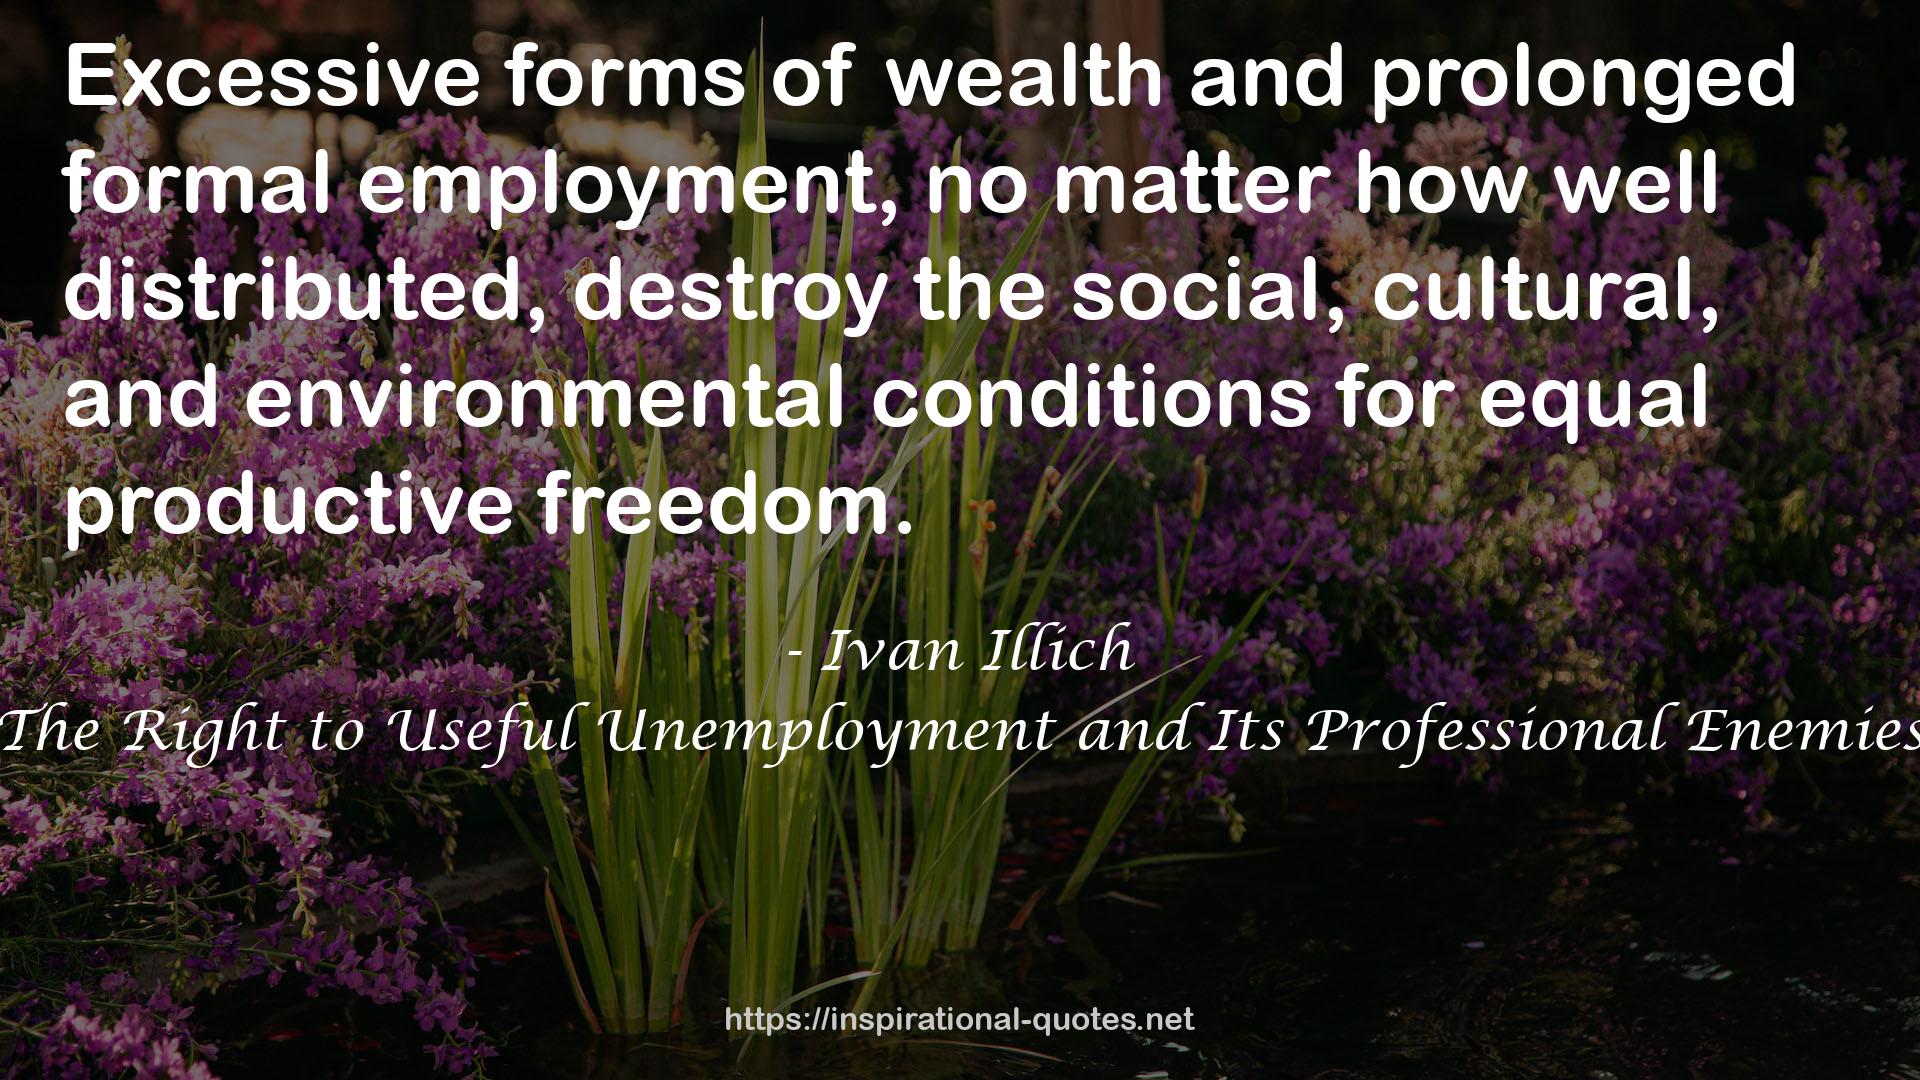 the social, cultural, and environmental conditions  QUOTES